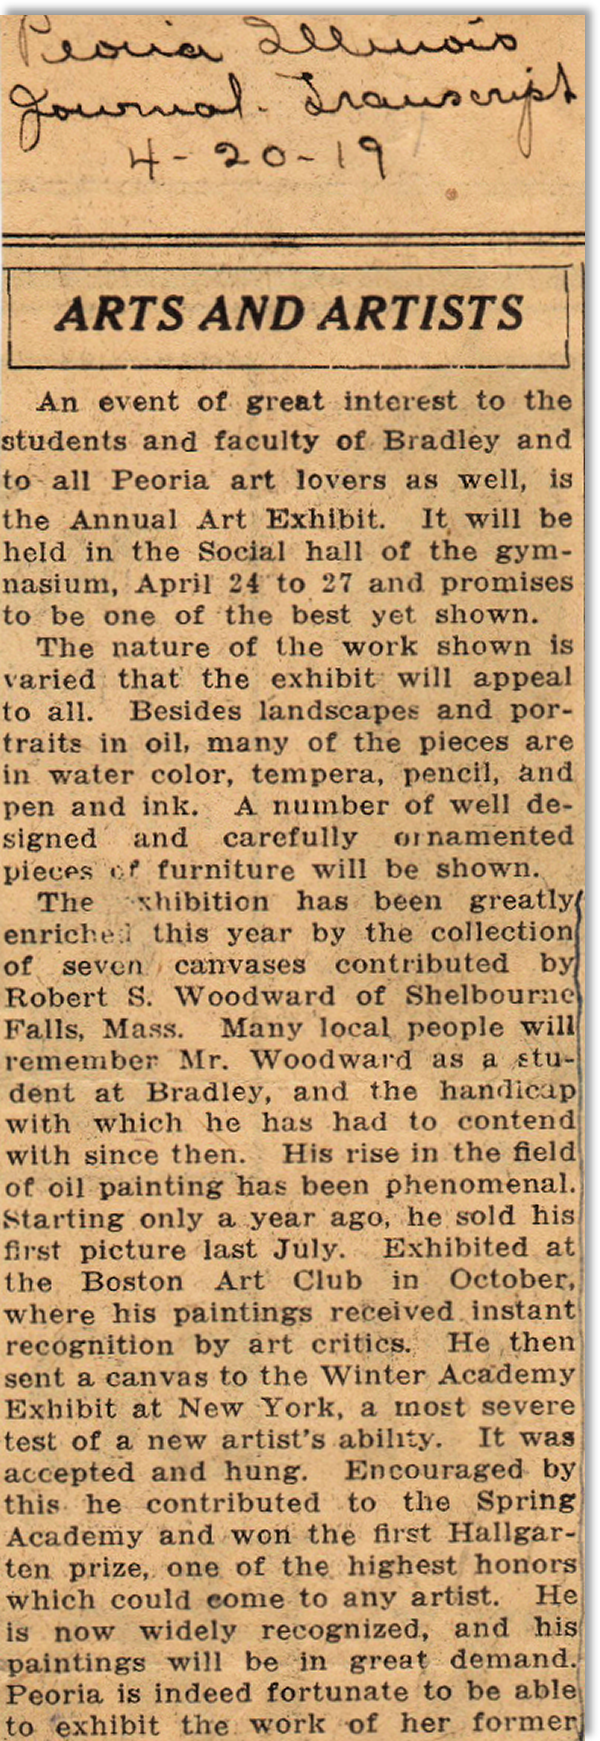 RSW re-typed this critique from the Peoria Illinois Journal Transcript from April 27, 1919